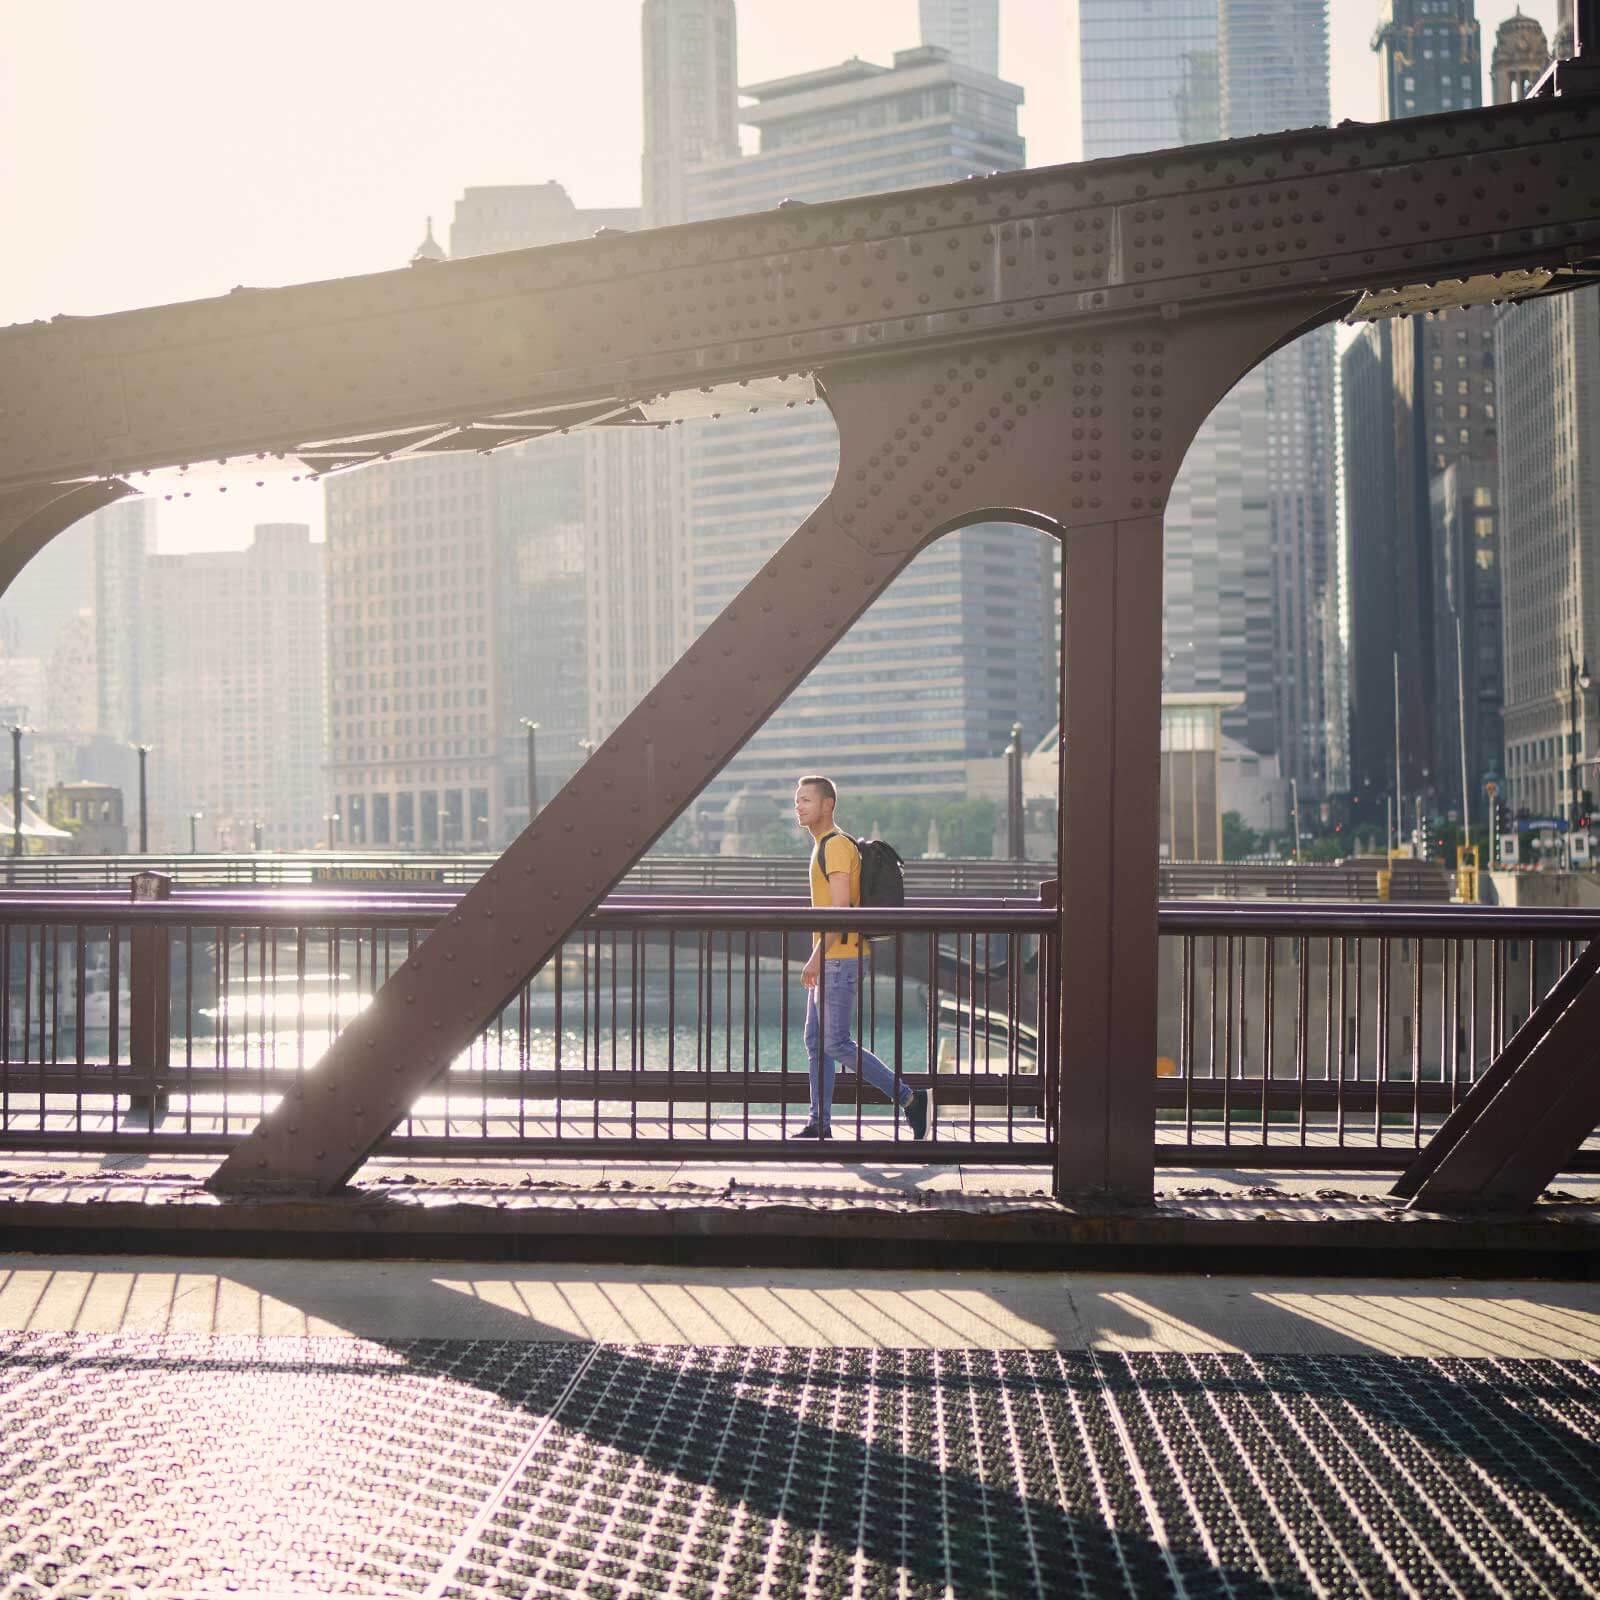 View of a city through a bridge with a pedestrian walking in the distance